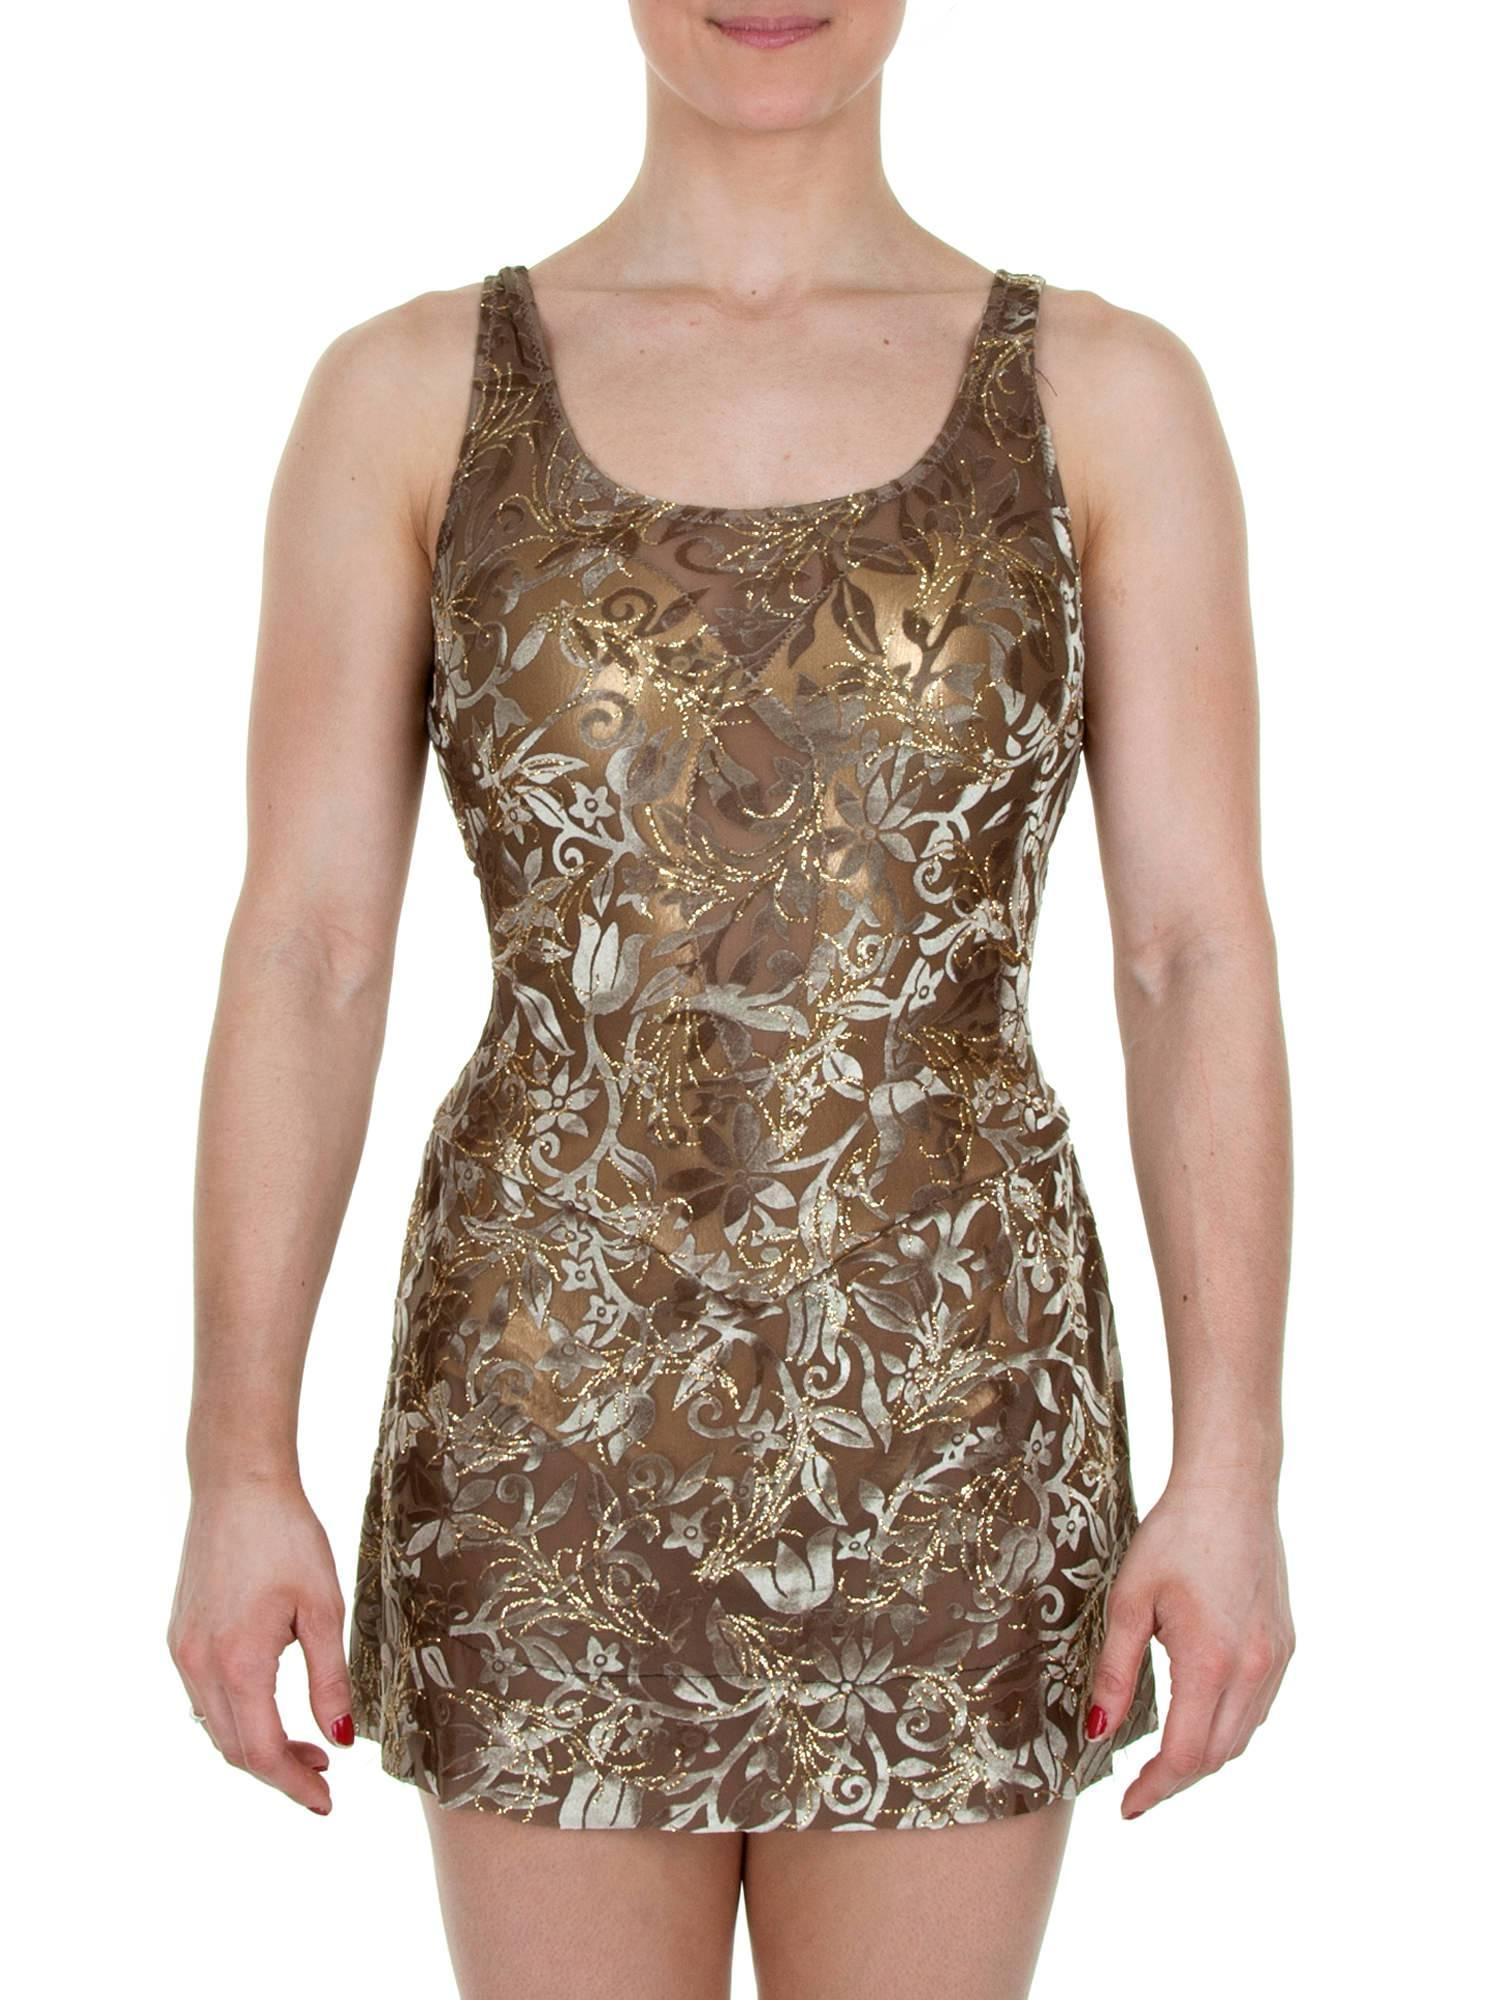 Tank Skating Dress in Sheer Fabric with Gold Appliqué Underneath